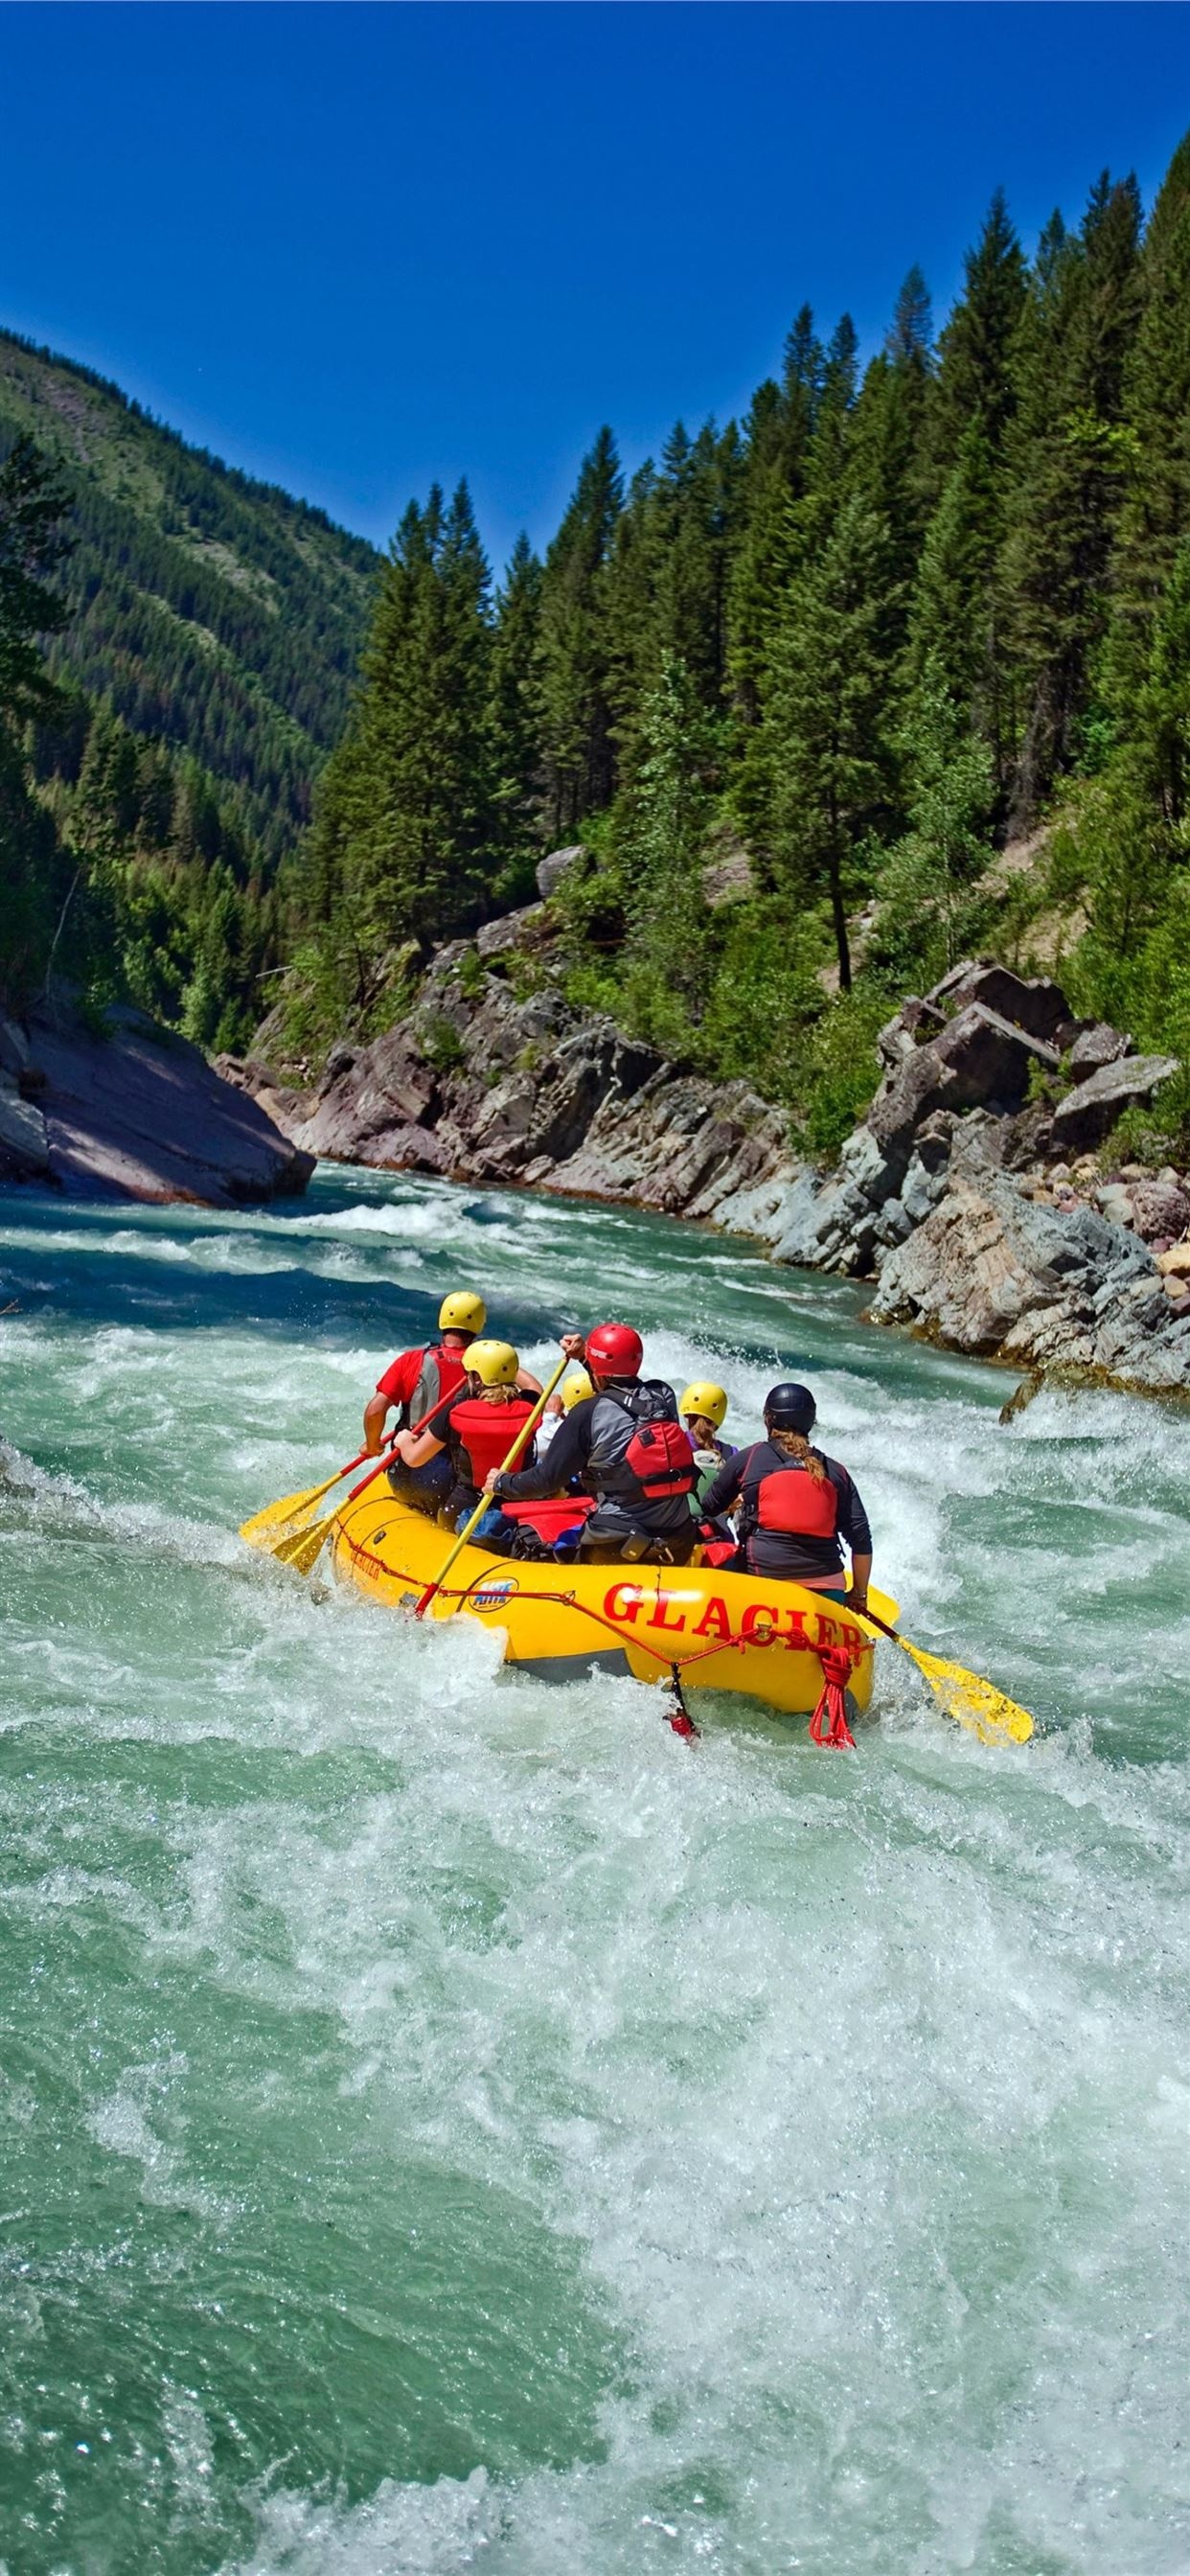 iPhone wallpapers, Rafting inspiration, Adventure on water, Free download, 1250x2690 HD Phone